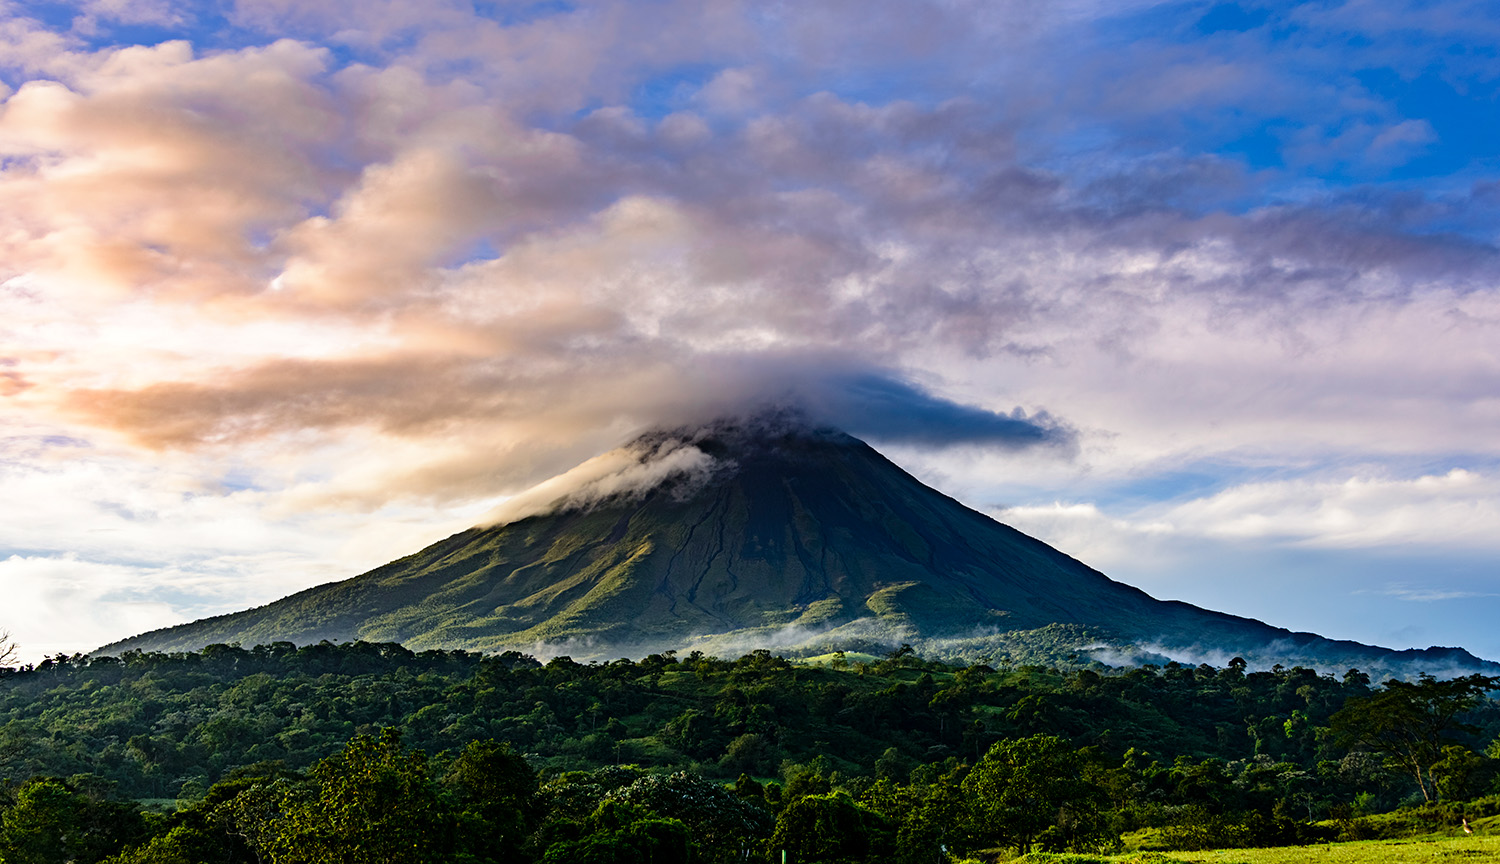 An impressive cone-shaped volcano, with clouds over its summit, a lake on the side and green vegetation in front.